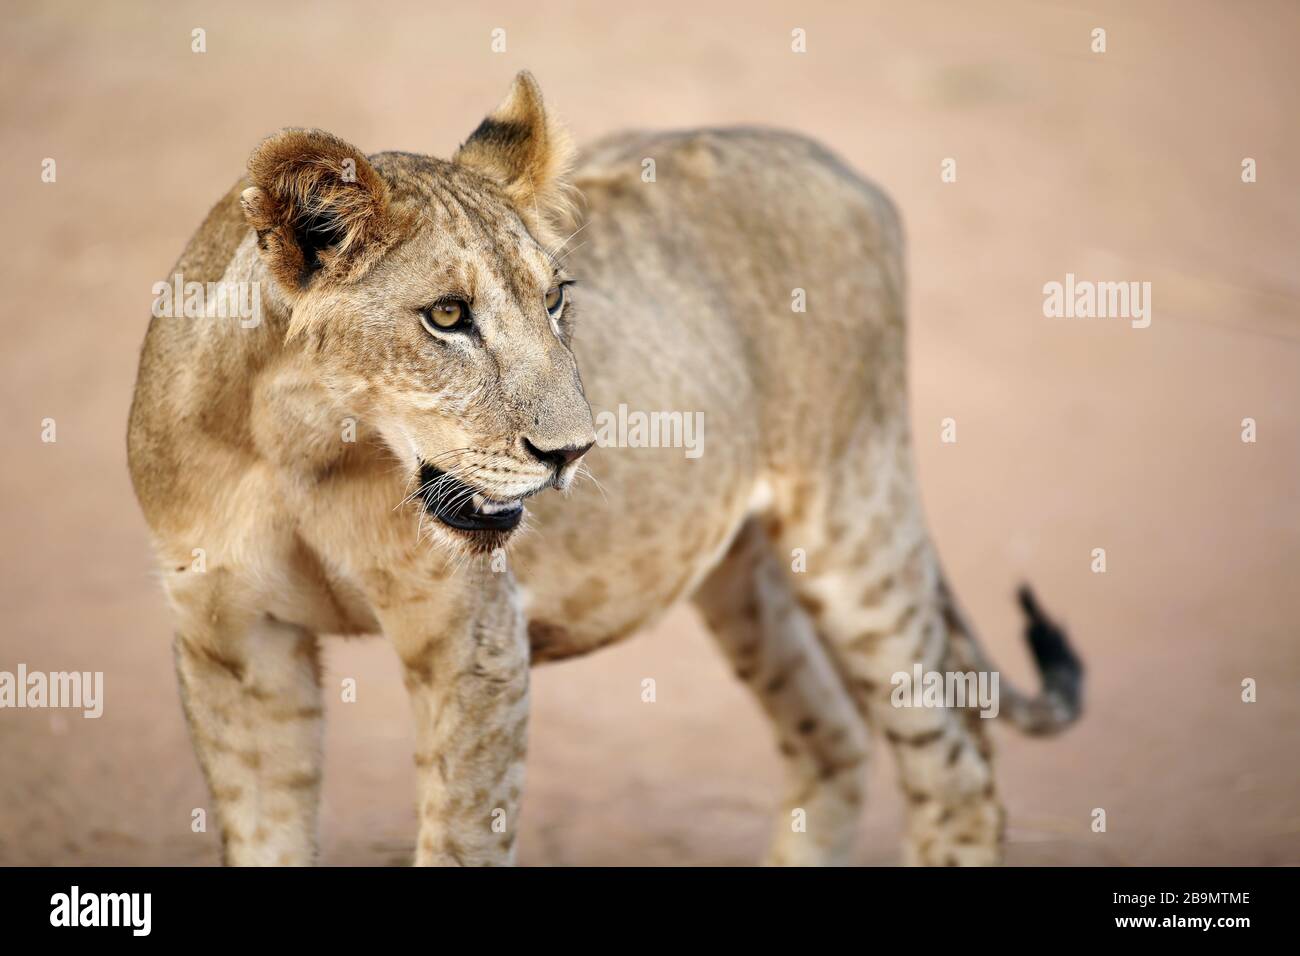 A thirsty young lion by the river bank in Samburu National Reserve, Kenya. Stock Photo